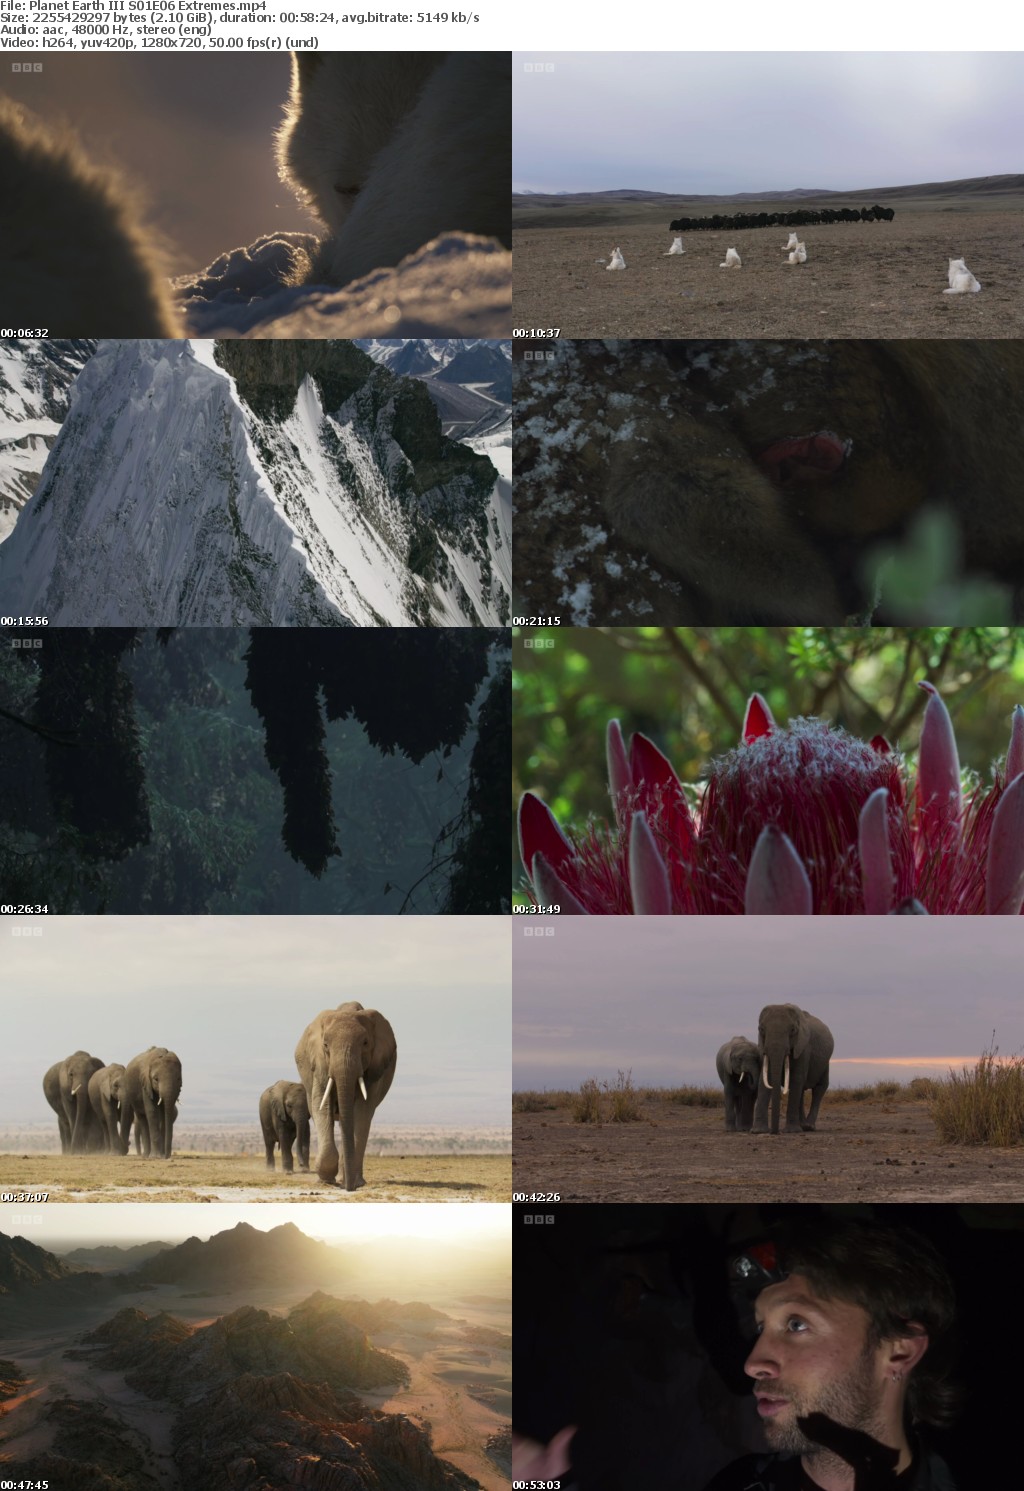 Planet Earth III S01E06 Extremes (1280x720p HD, 50fps, soft Eng subs)